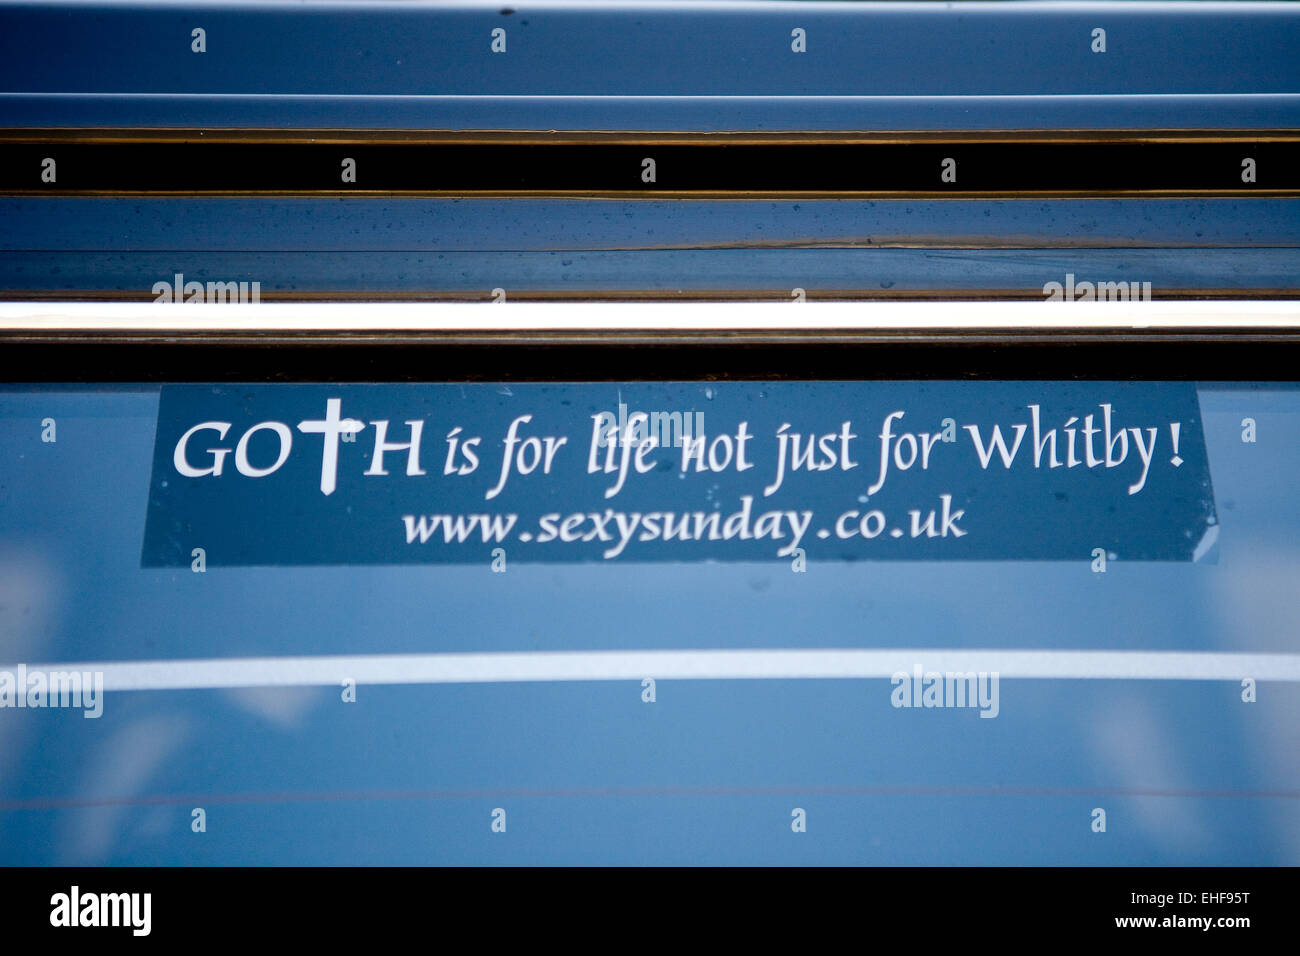 Goth is for life not juts for Whitby car sticker at Whitby Goth Weekender. Stock Photo